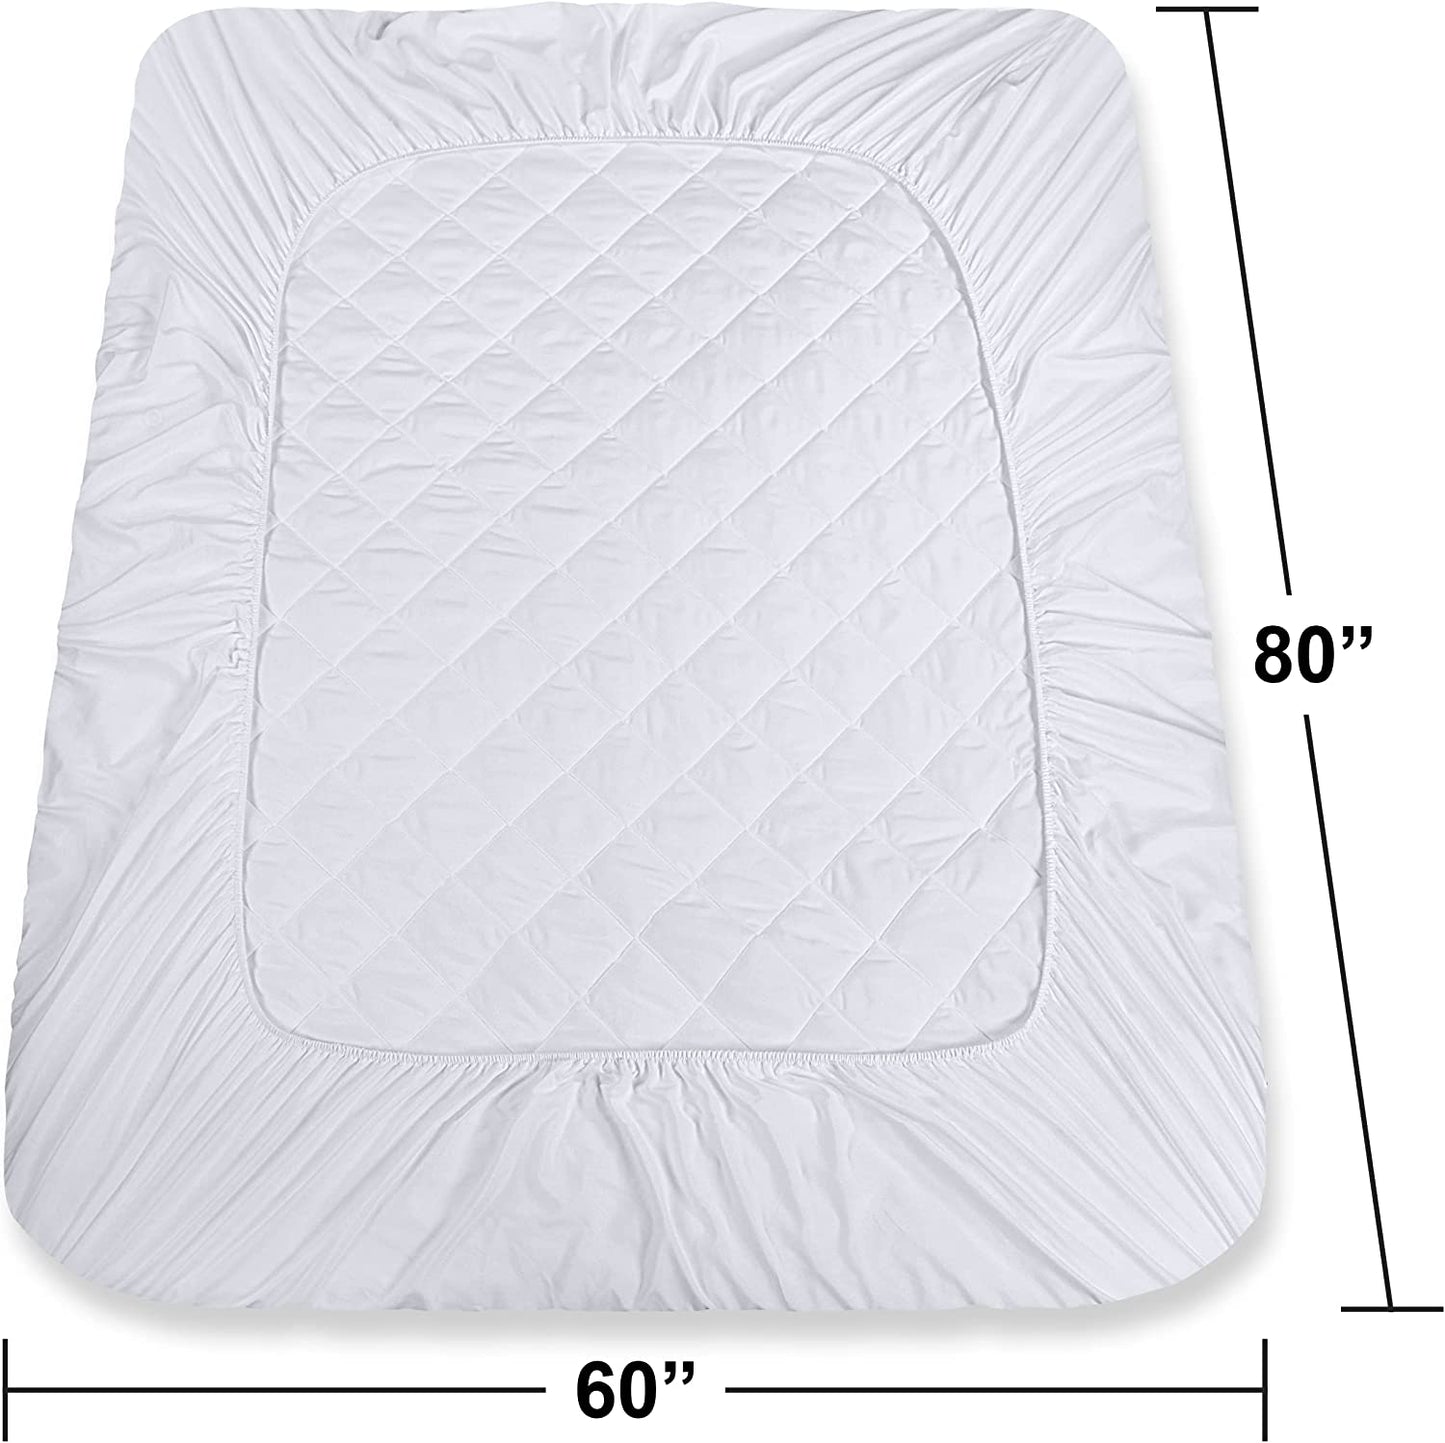 Quilted Fitted Mattress Pad (Queen) - Elastic Fitted Mattress Protector - Mattress Cover Stretches up to 16 Inches Deep - Machine Washable Mattress Topper